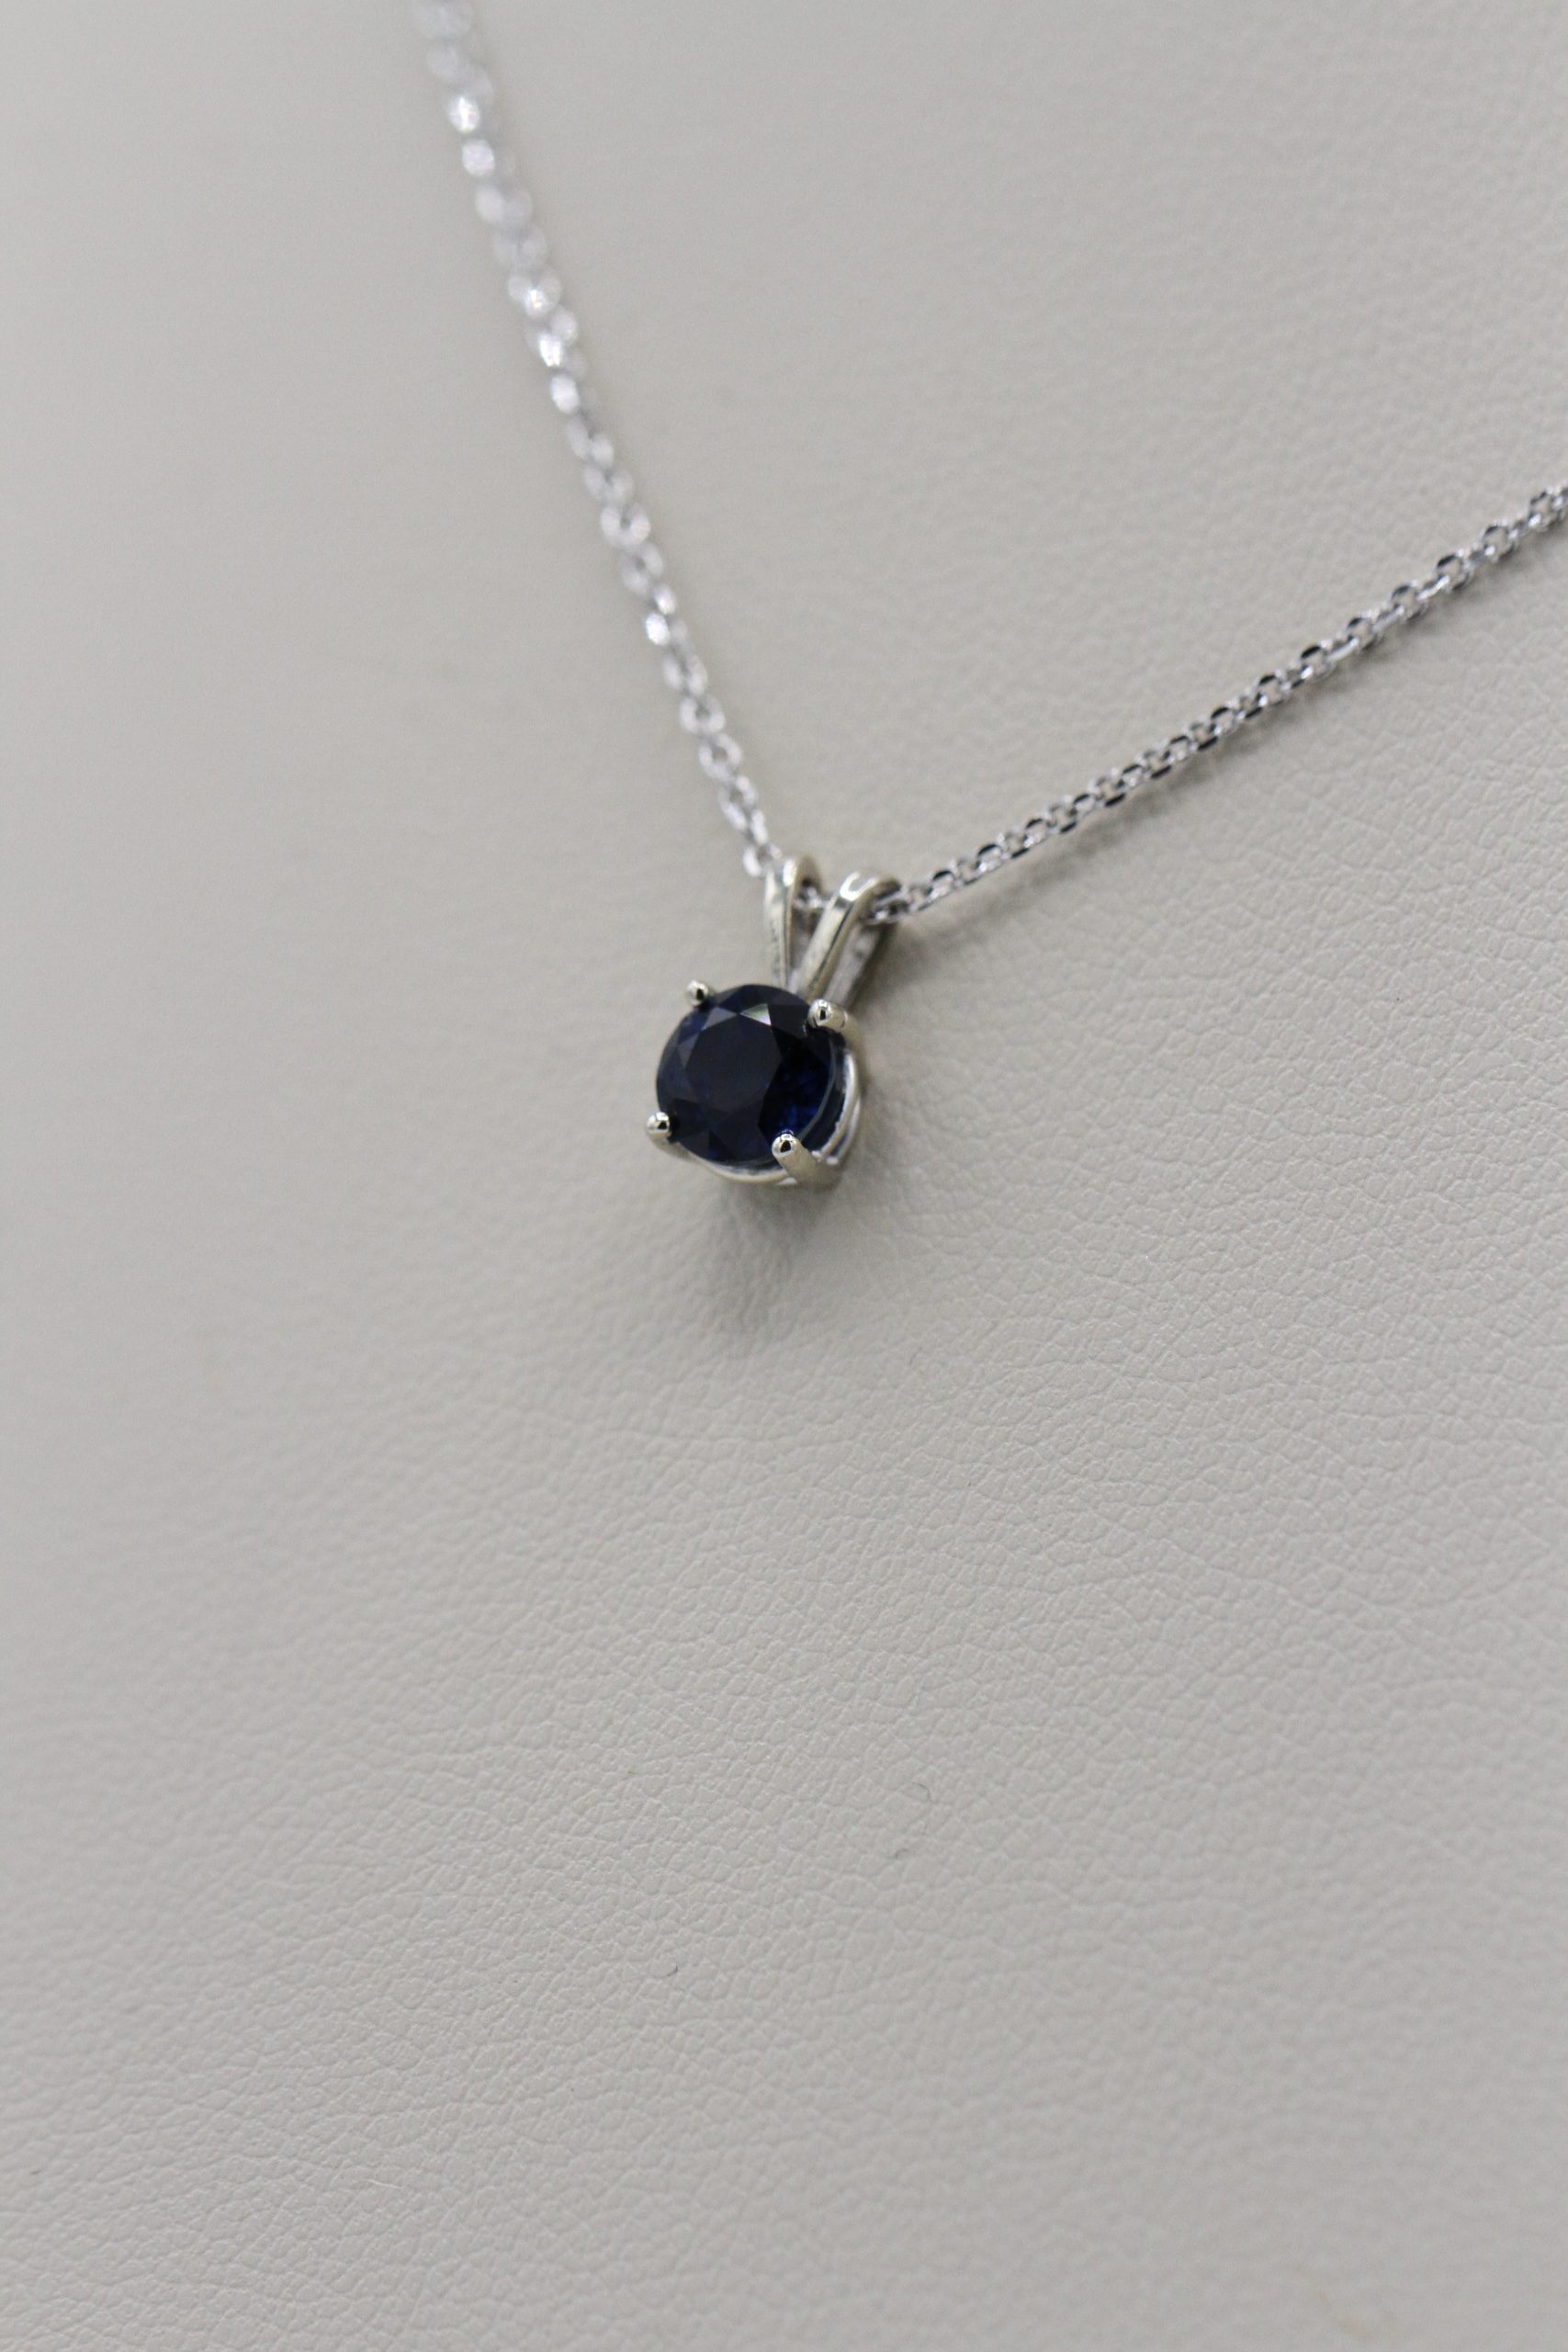 A necklace with a small, dark blue stone